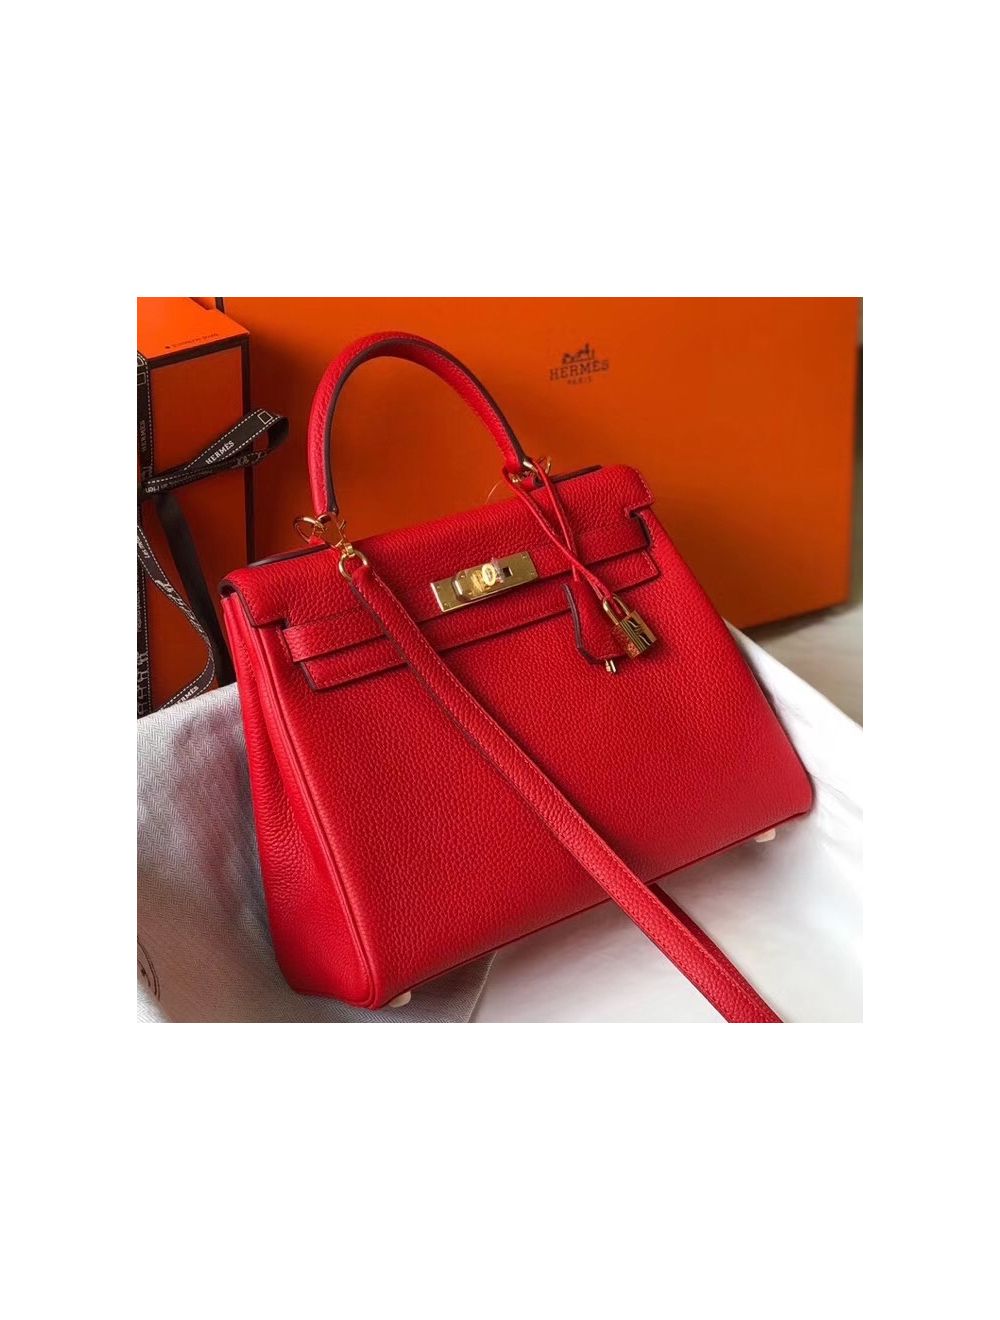 Hermes Kelly 25 Retourne Bag Rouge Piment Swift Red Leather Phw